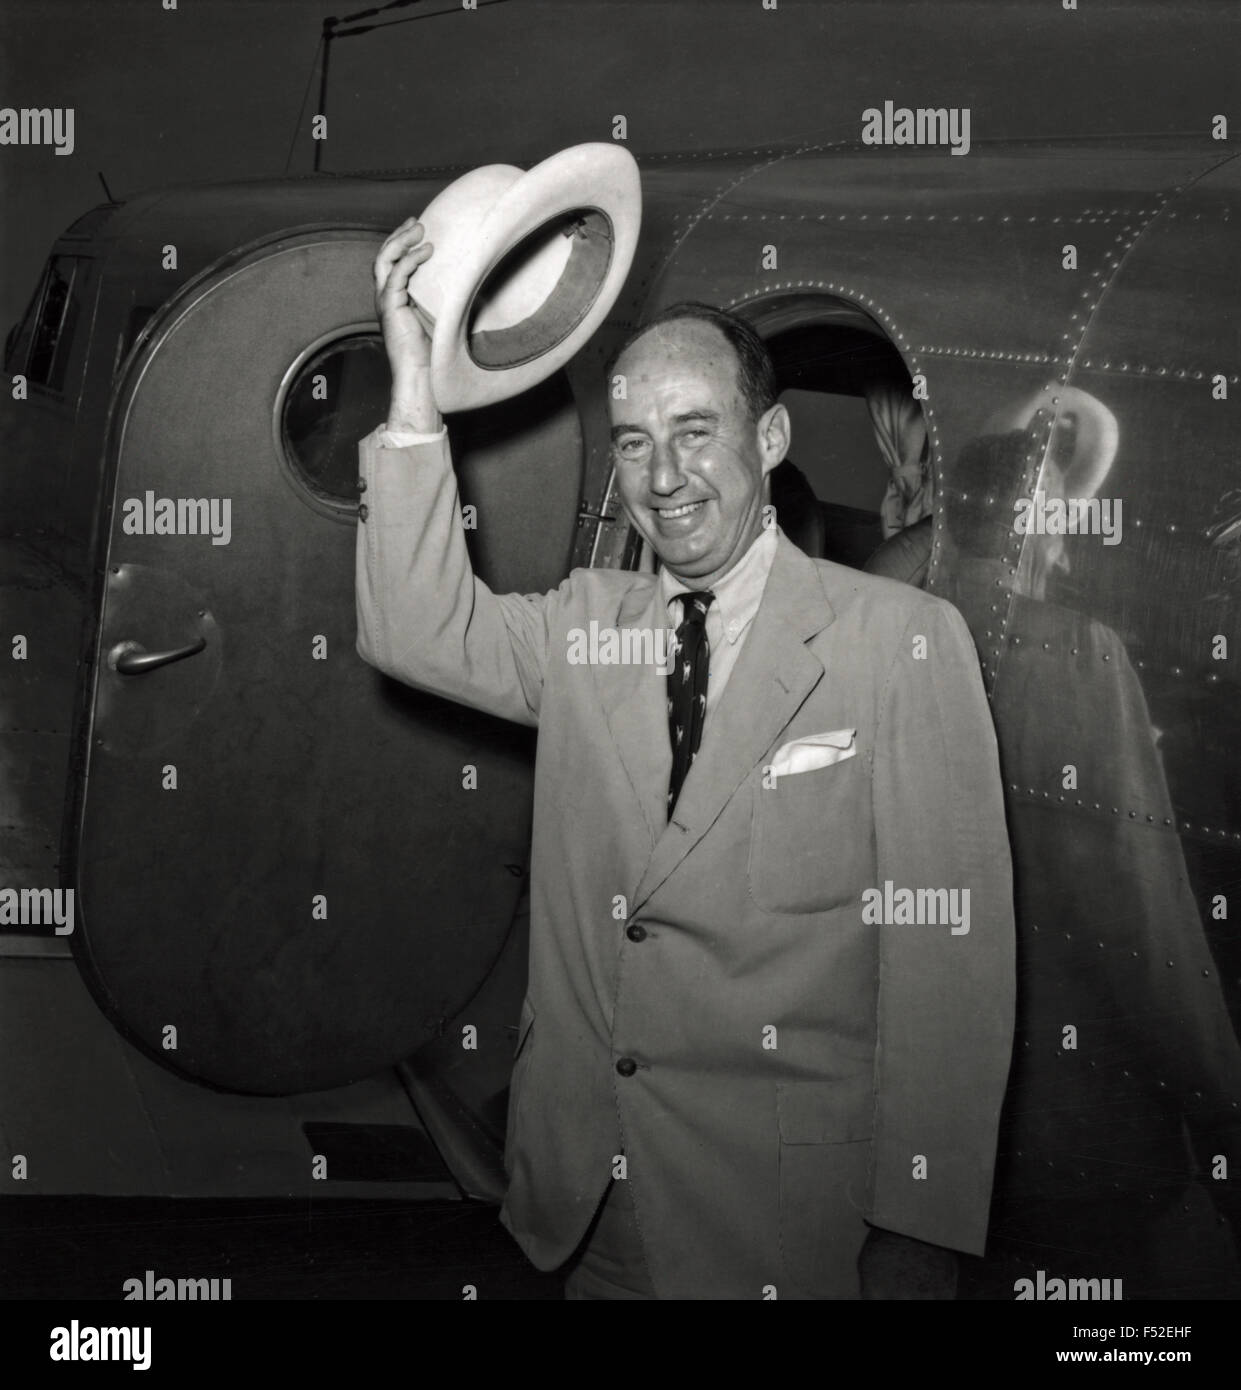 U.S. Democratic presidential candidate Adlai Stevenson arrives by plane for the Democratic National Convention July 21, 1952 in Chicago, IL. Stock Photo